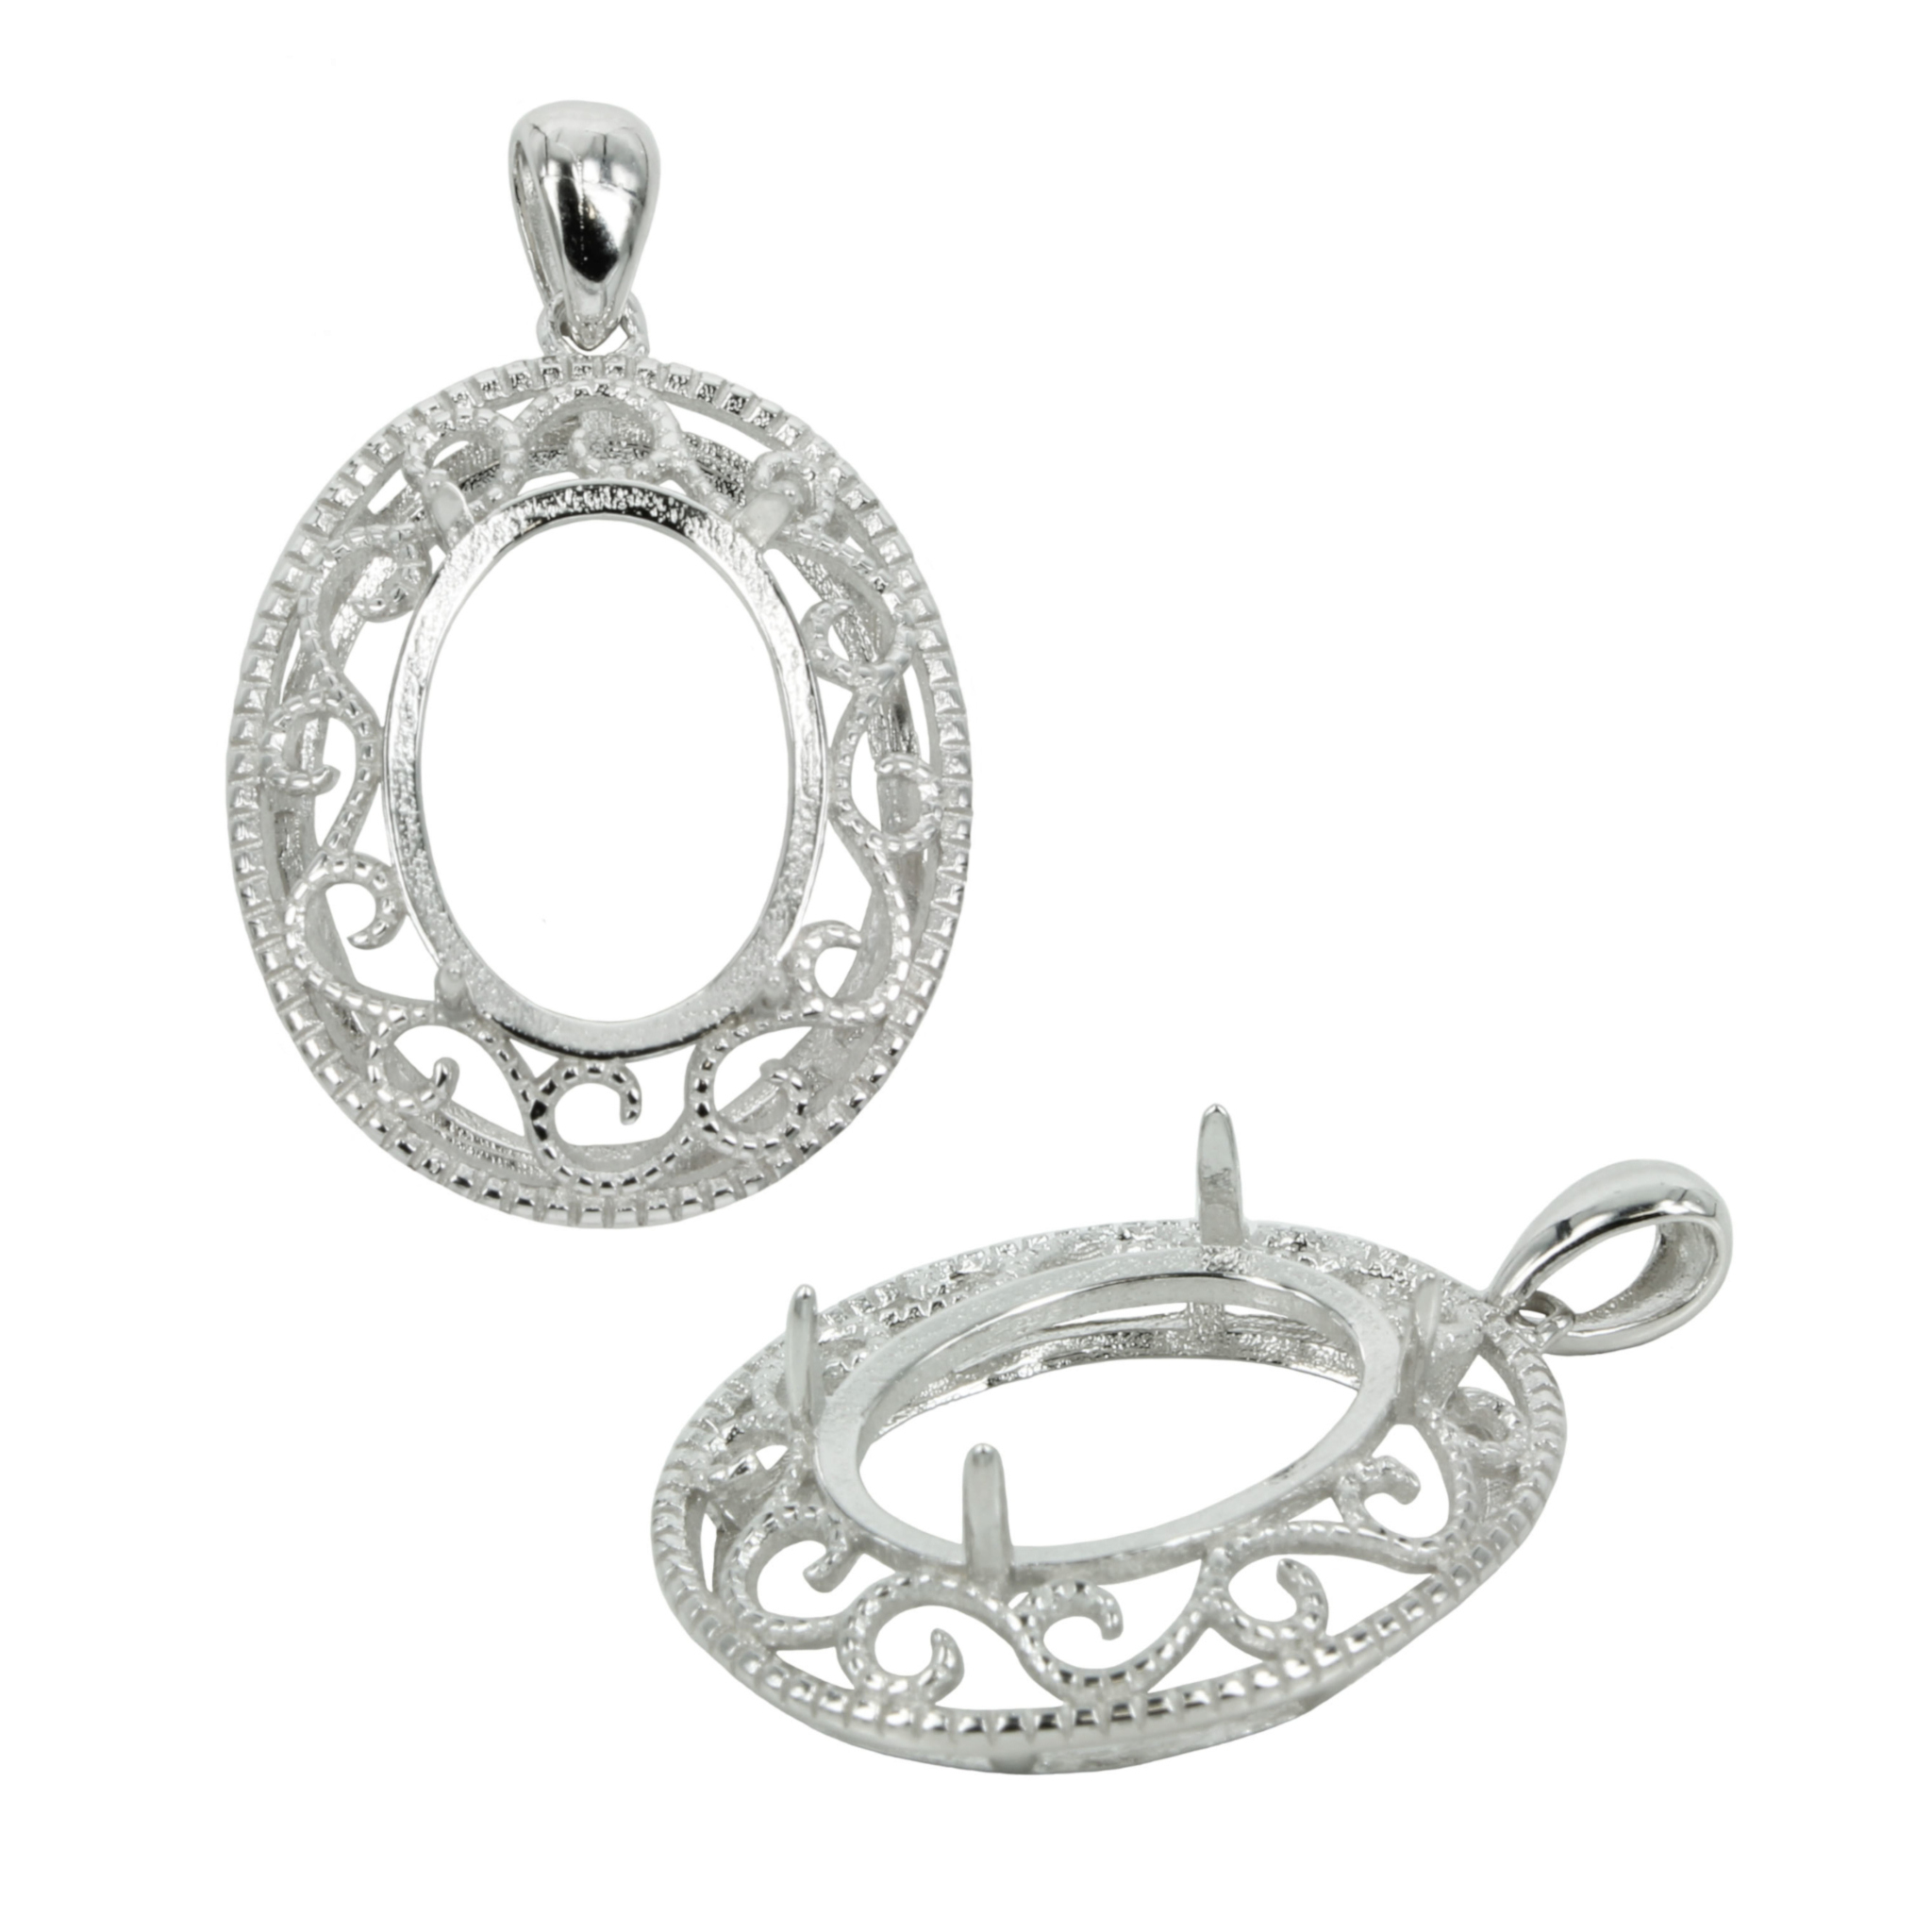 Oval rococo bezel pendant with soldered loop /& bail in sterling silver.